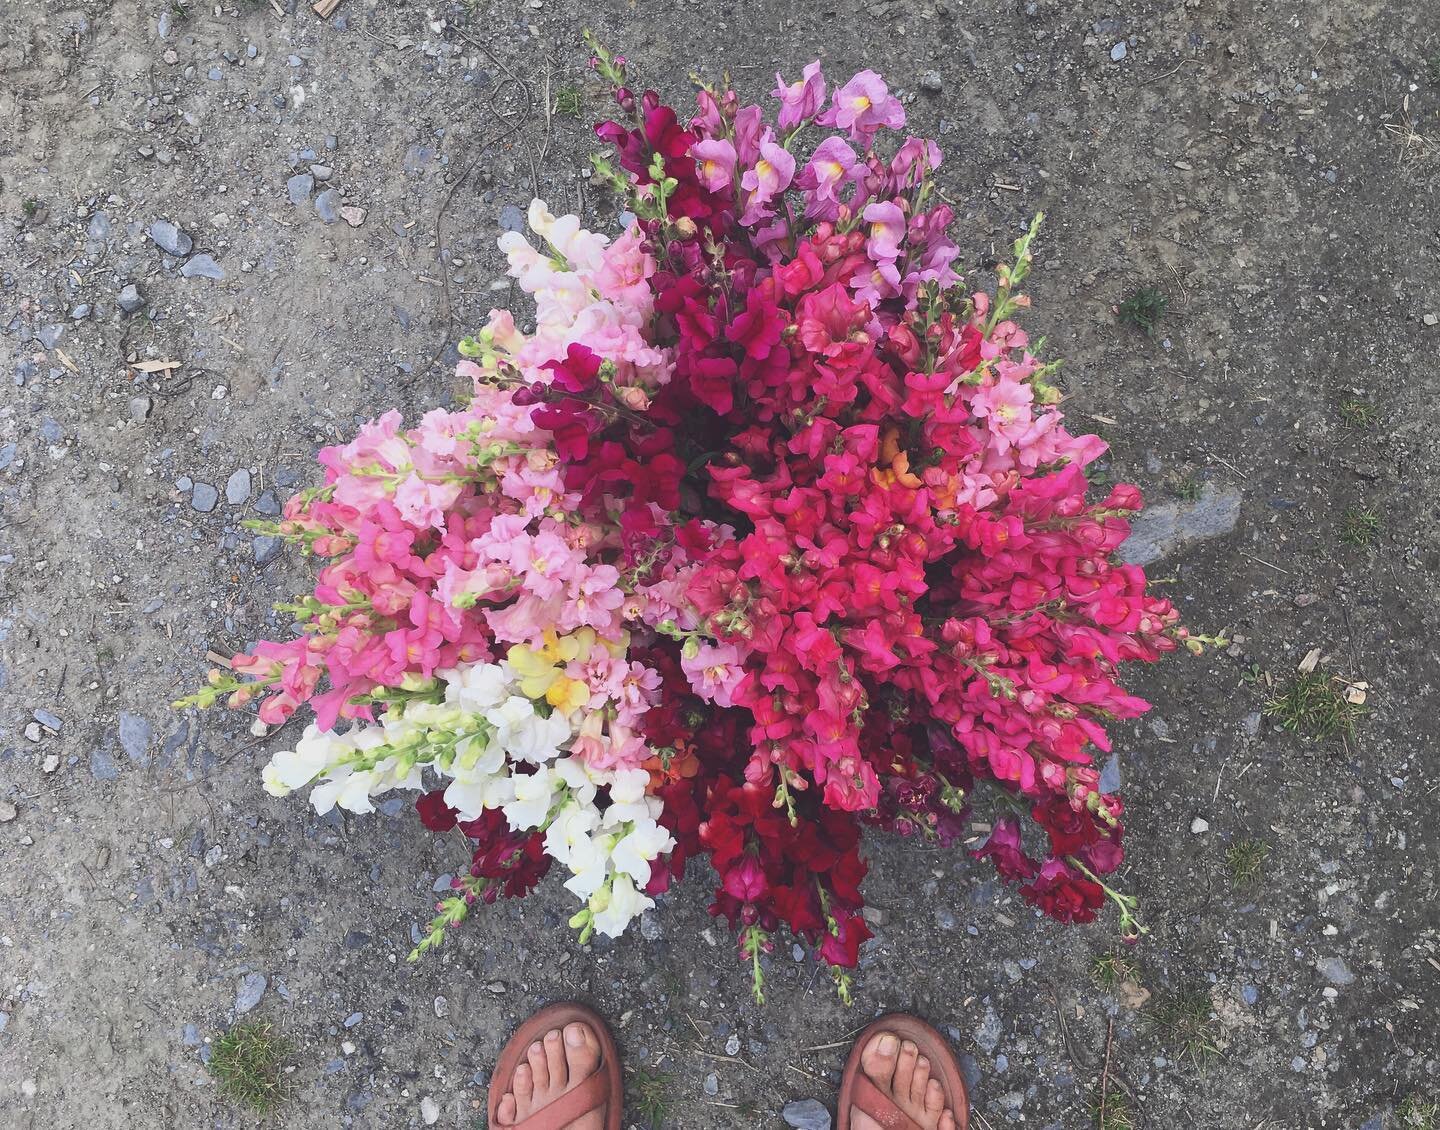 A beautiful way to start the day. Lots of bouquets going into the store this morning to brighten up what looks to be a pretty rainy weekend. #snapdragon #flowers #farmstand #flowerfarmer #smallfarm